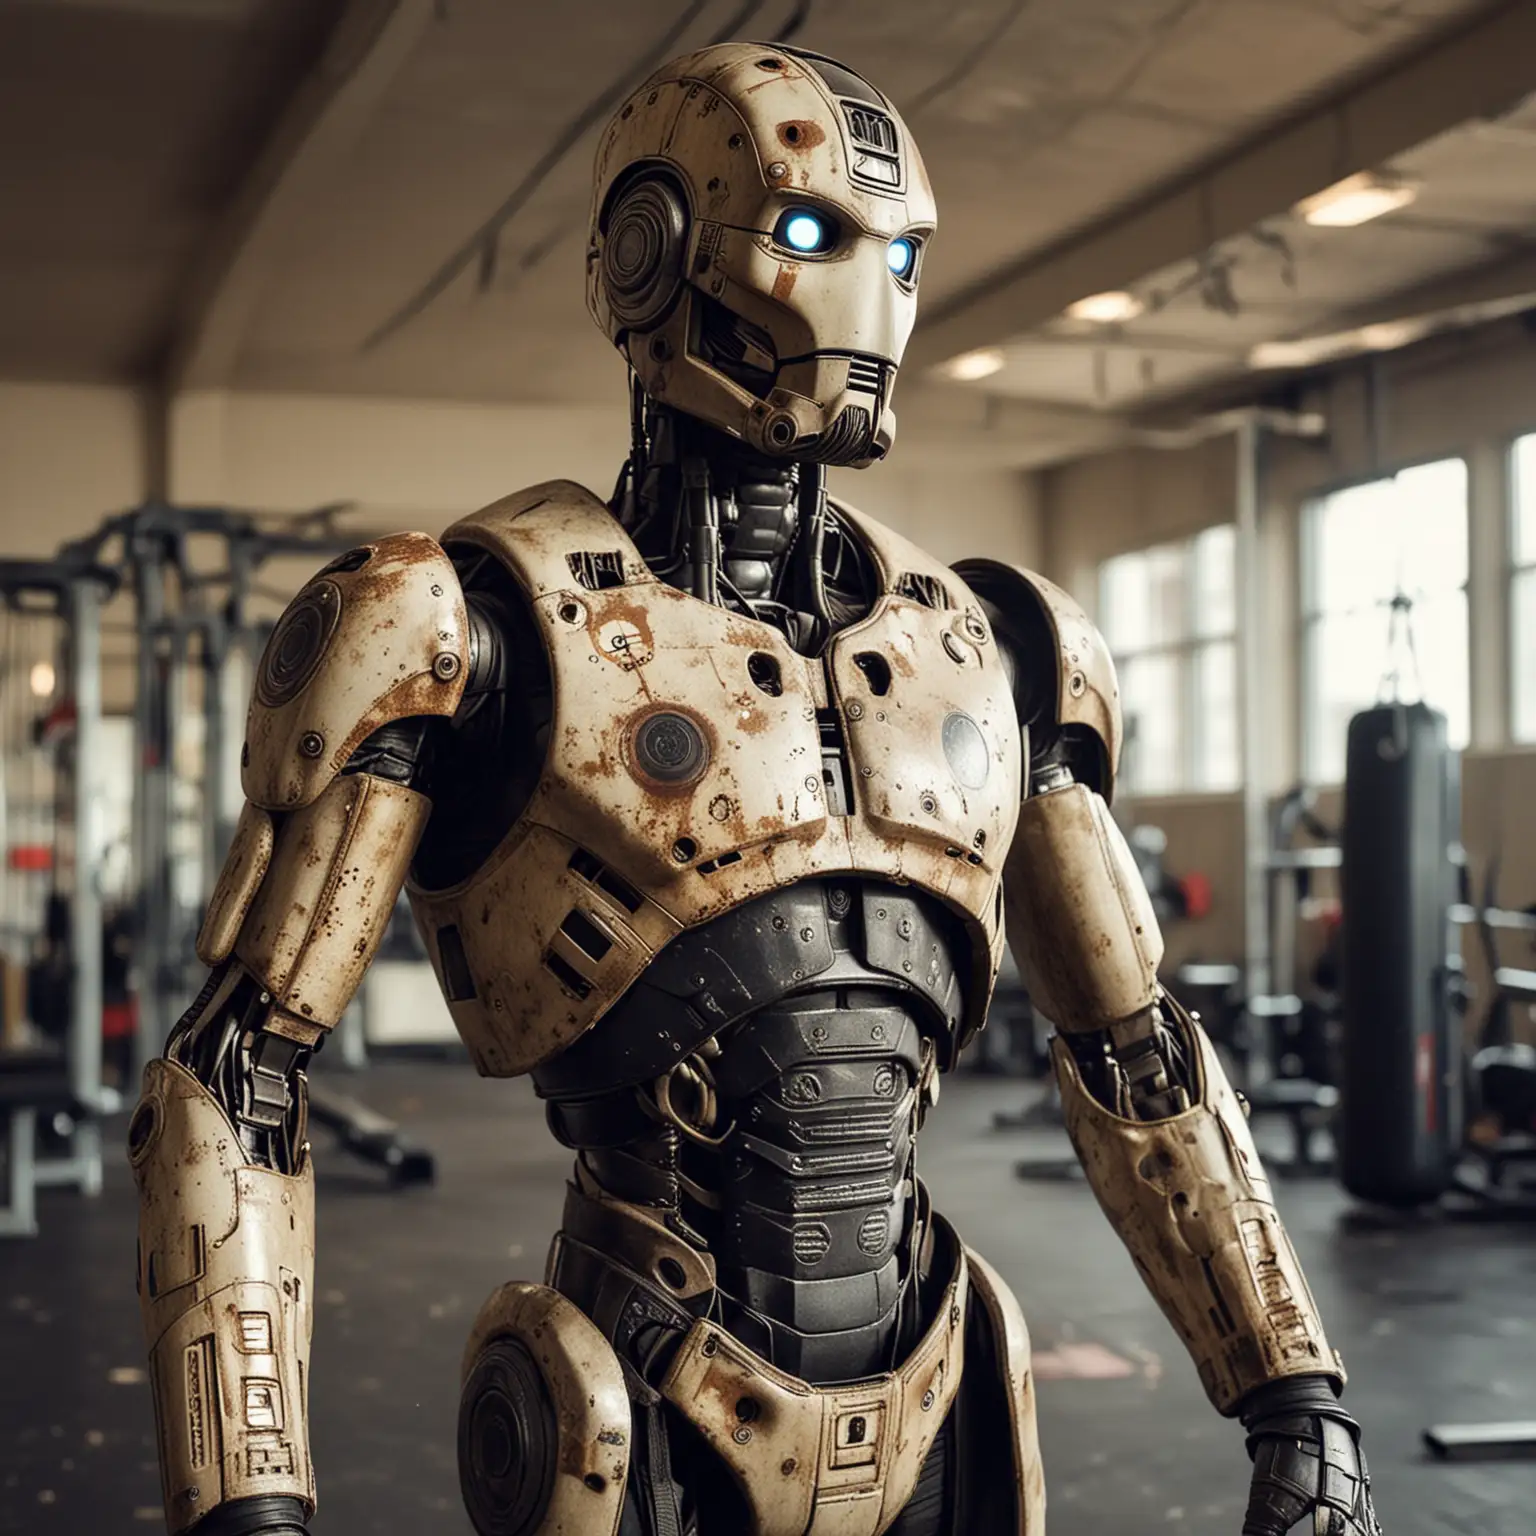 Weathered Fitness Instructor Droid in Gym After Boxing Career